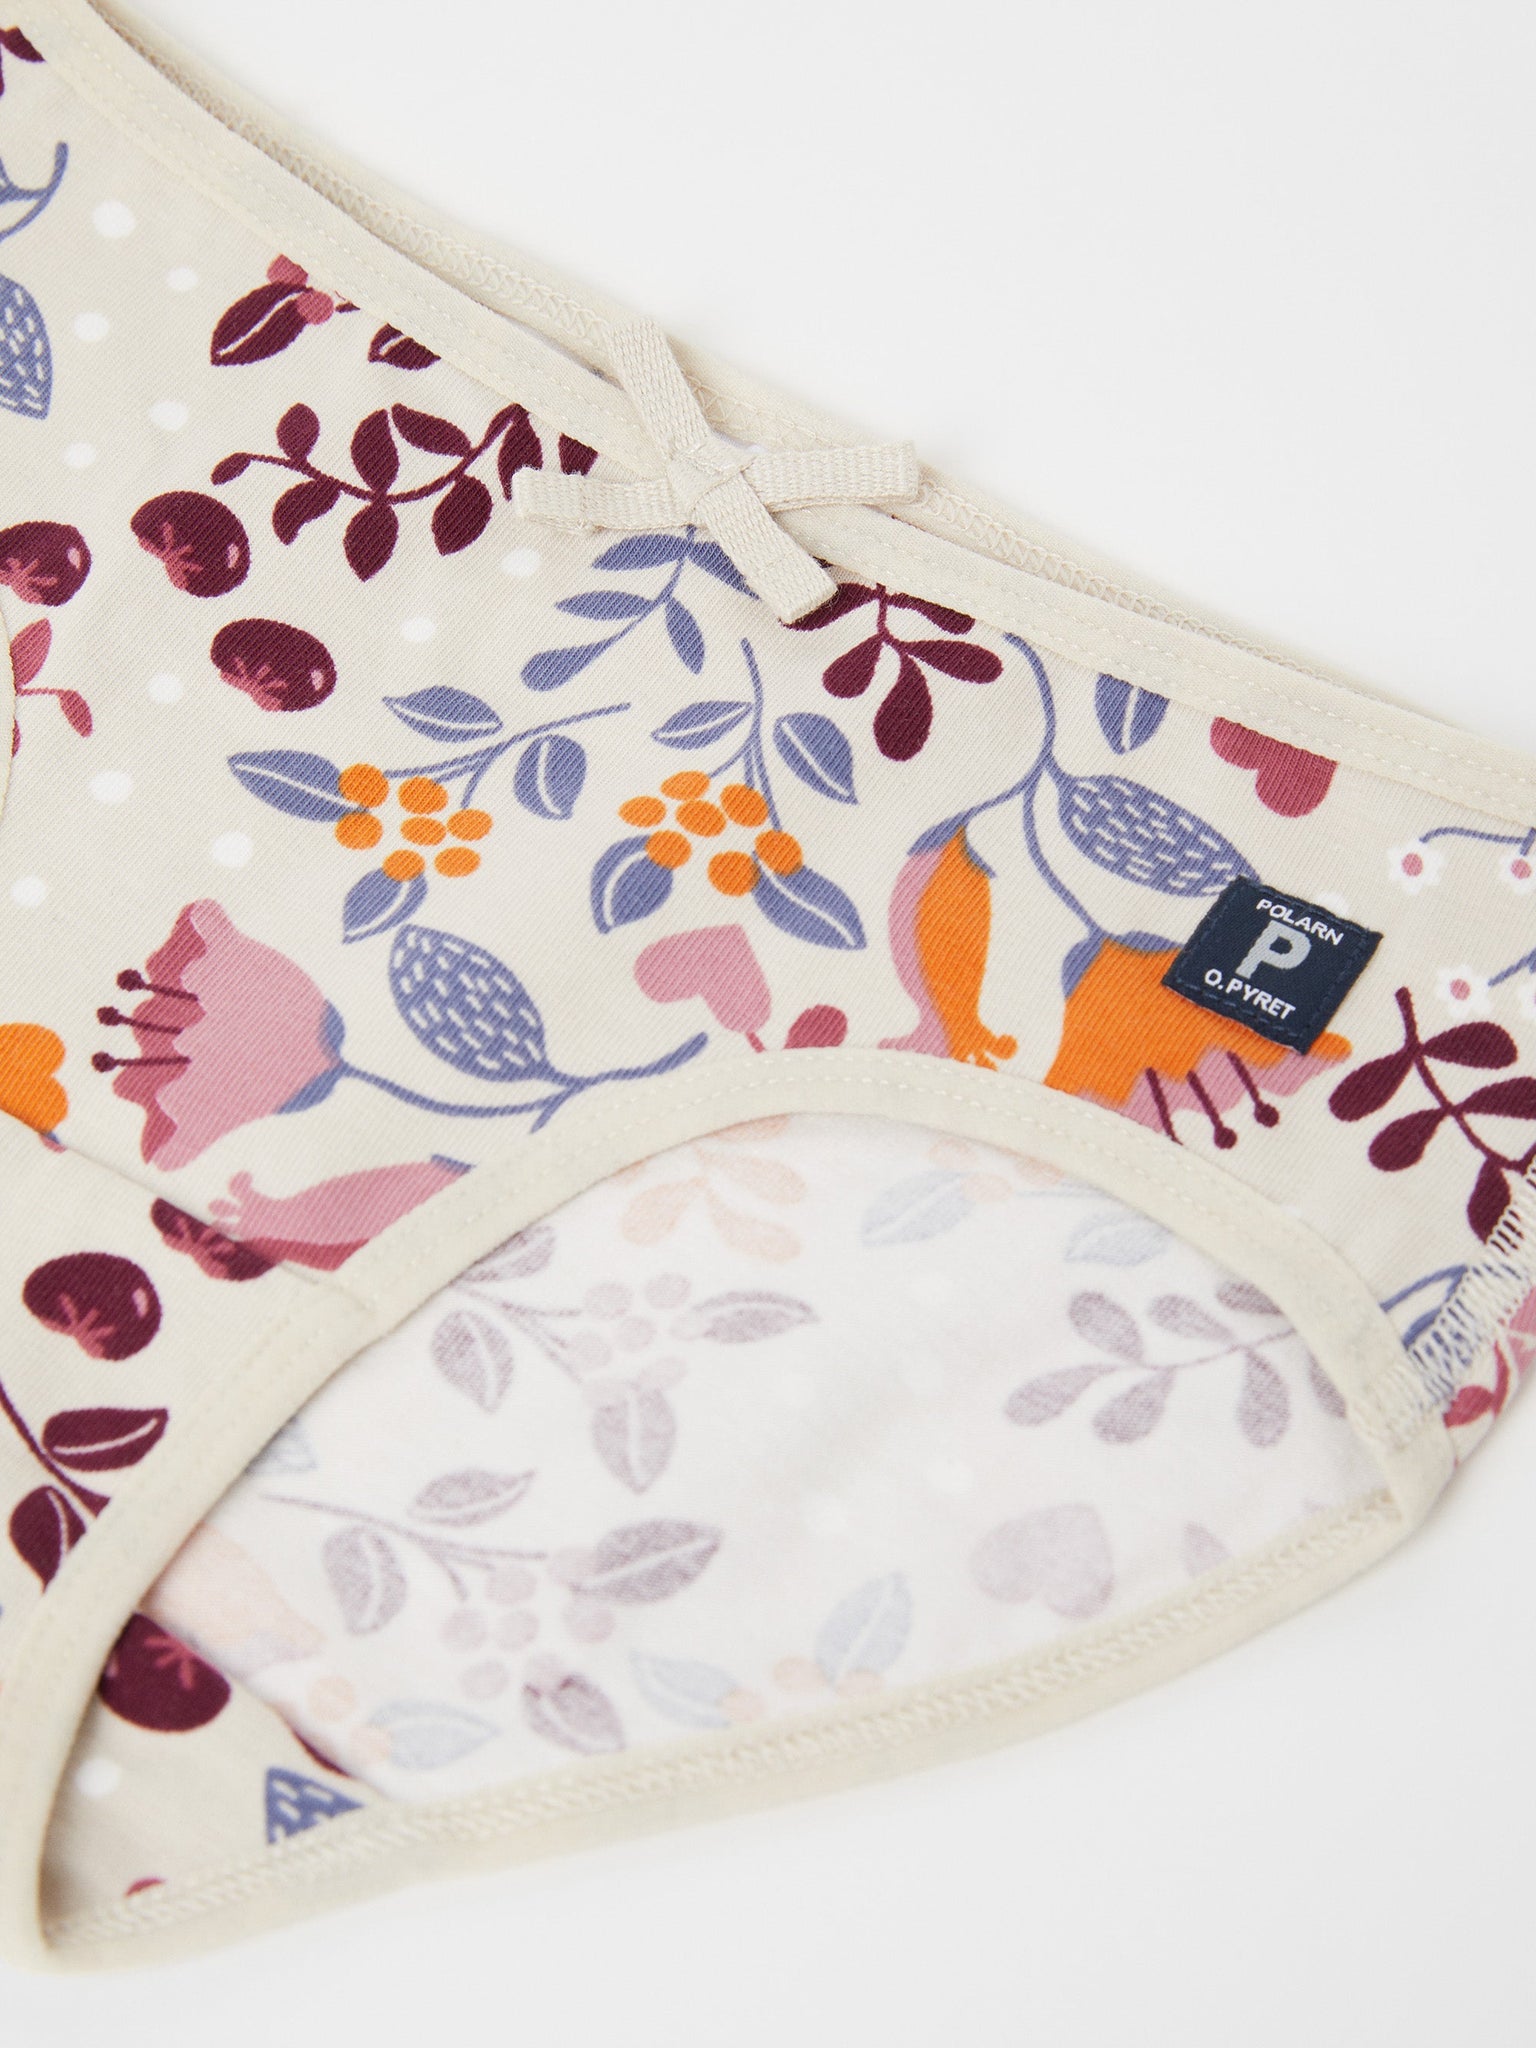 Organic Cotton Floral Girls Briefs from the Polarn O. Pyret kids collection. The best ethical kids clothes